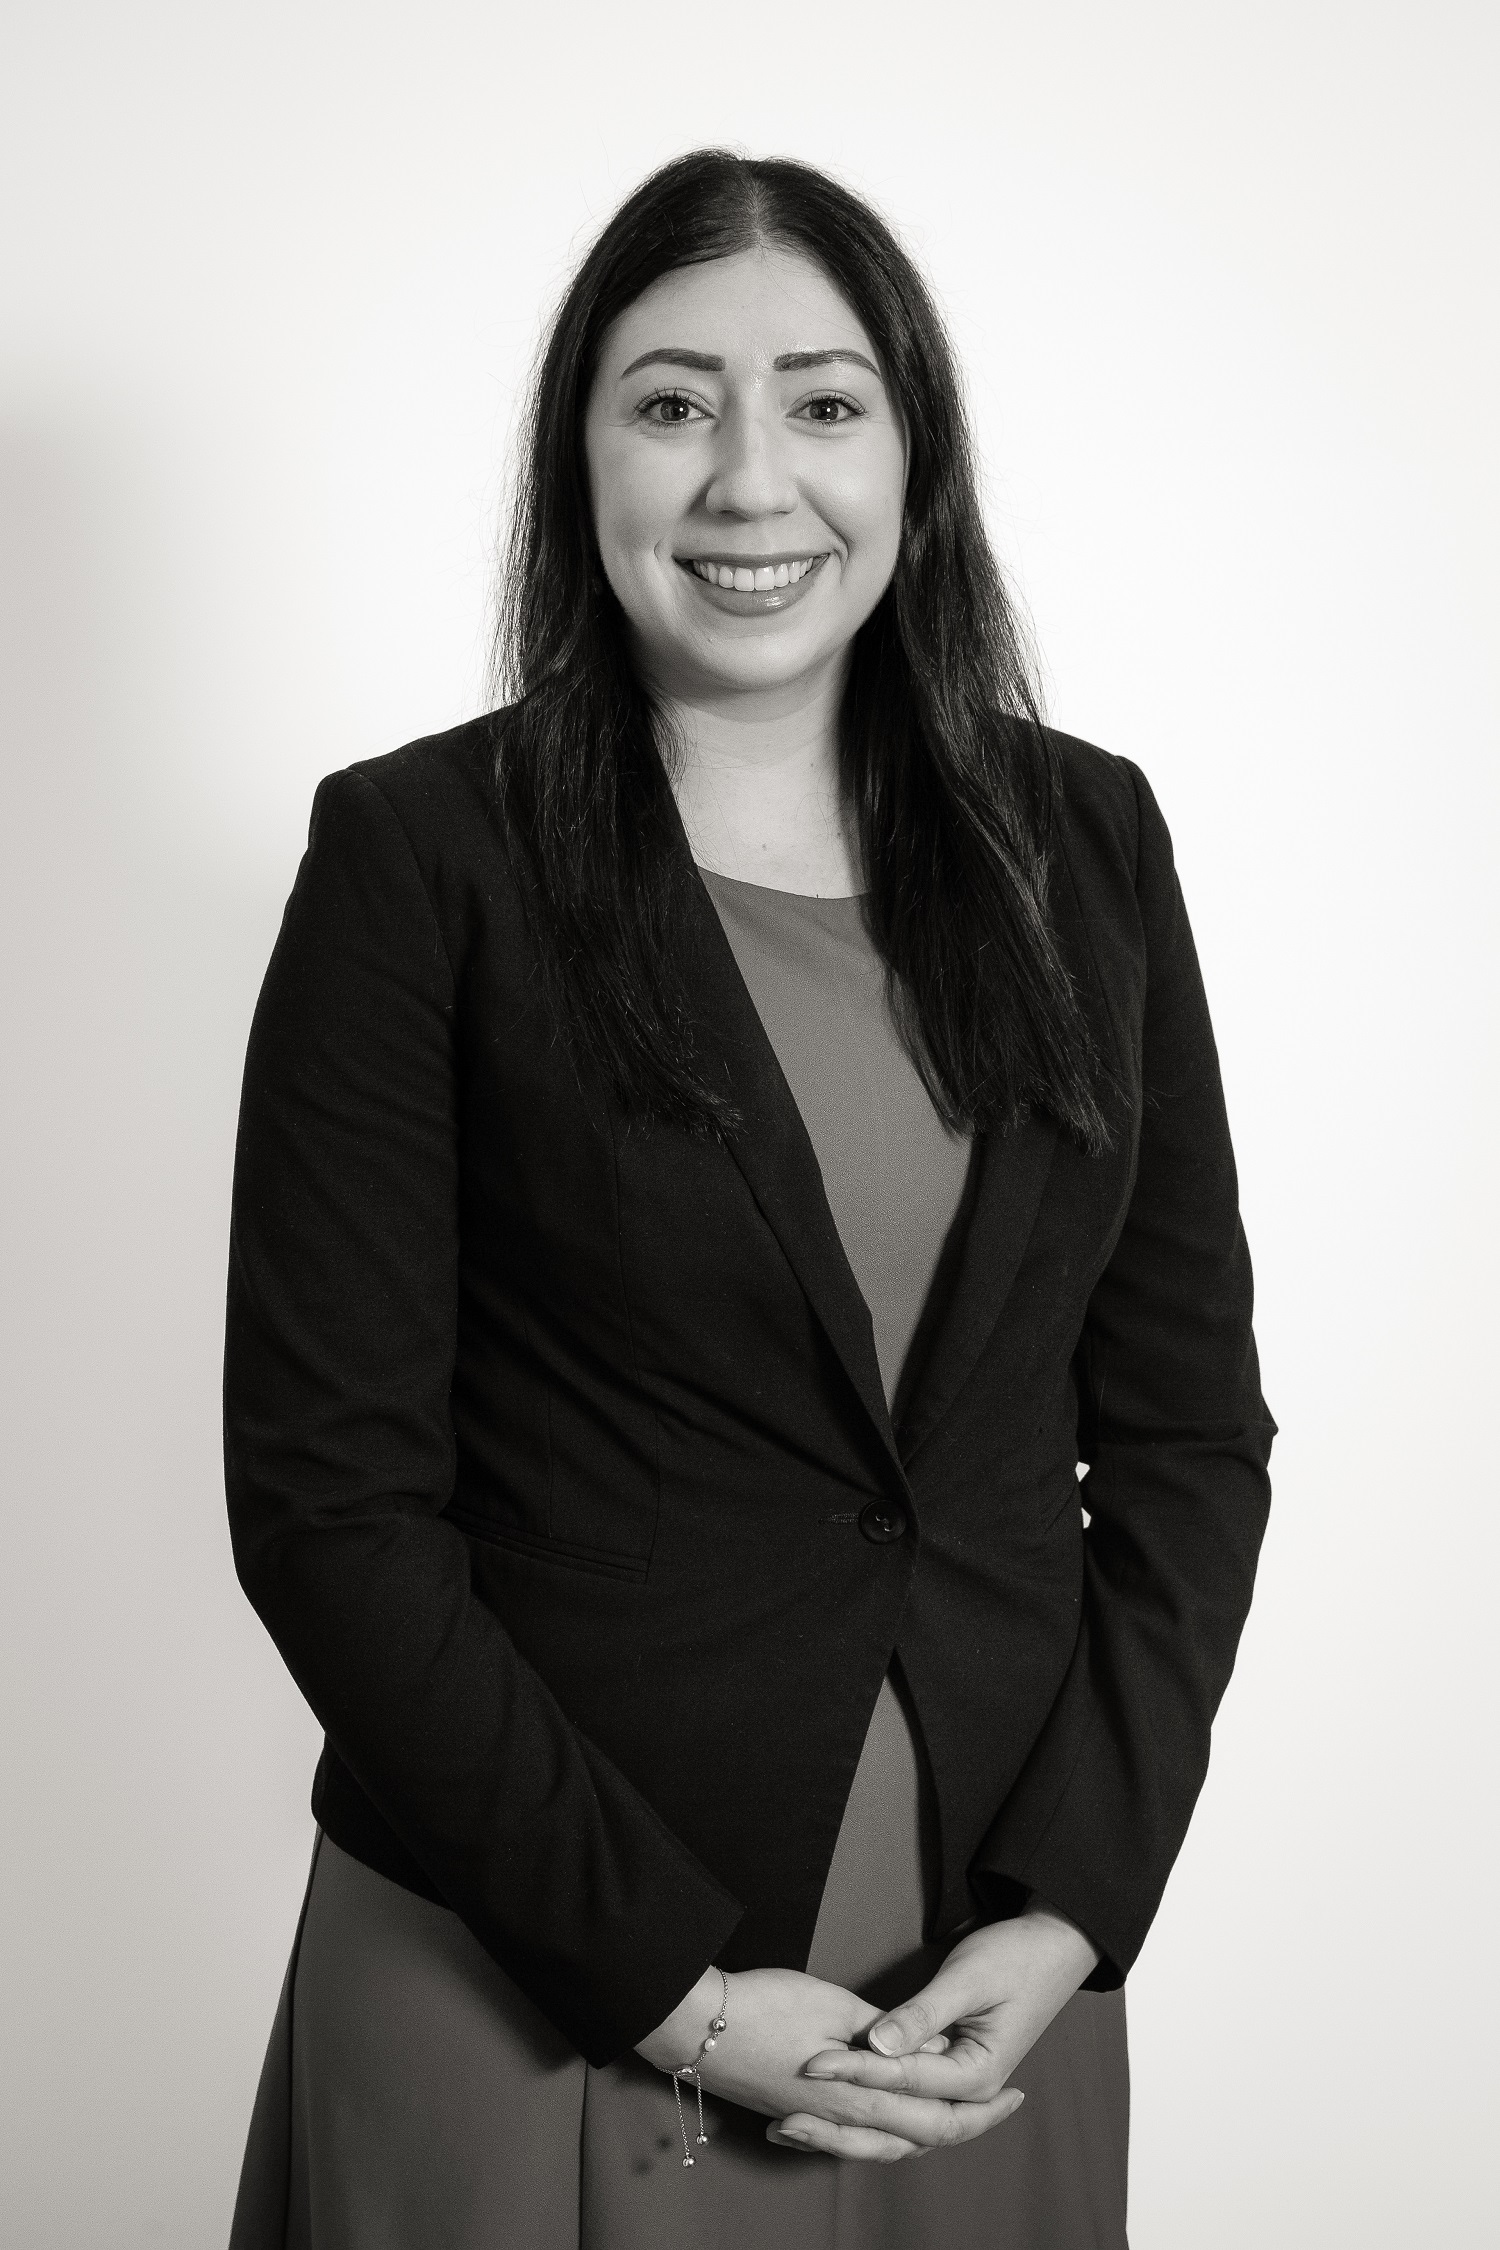 Marie-Louse Coco - Townsville Solicitor